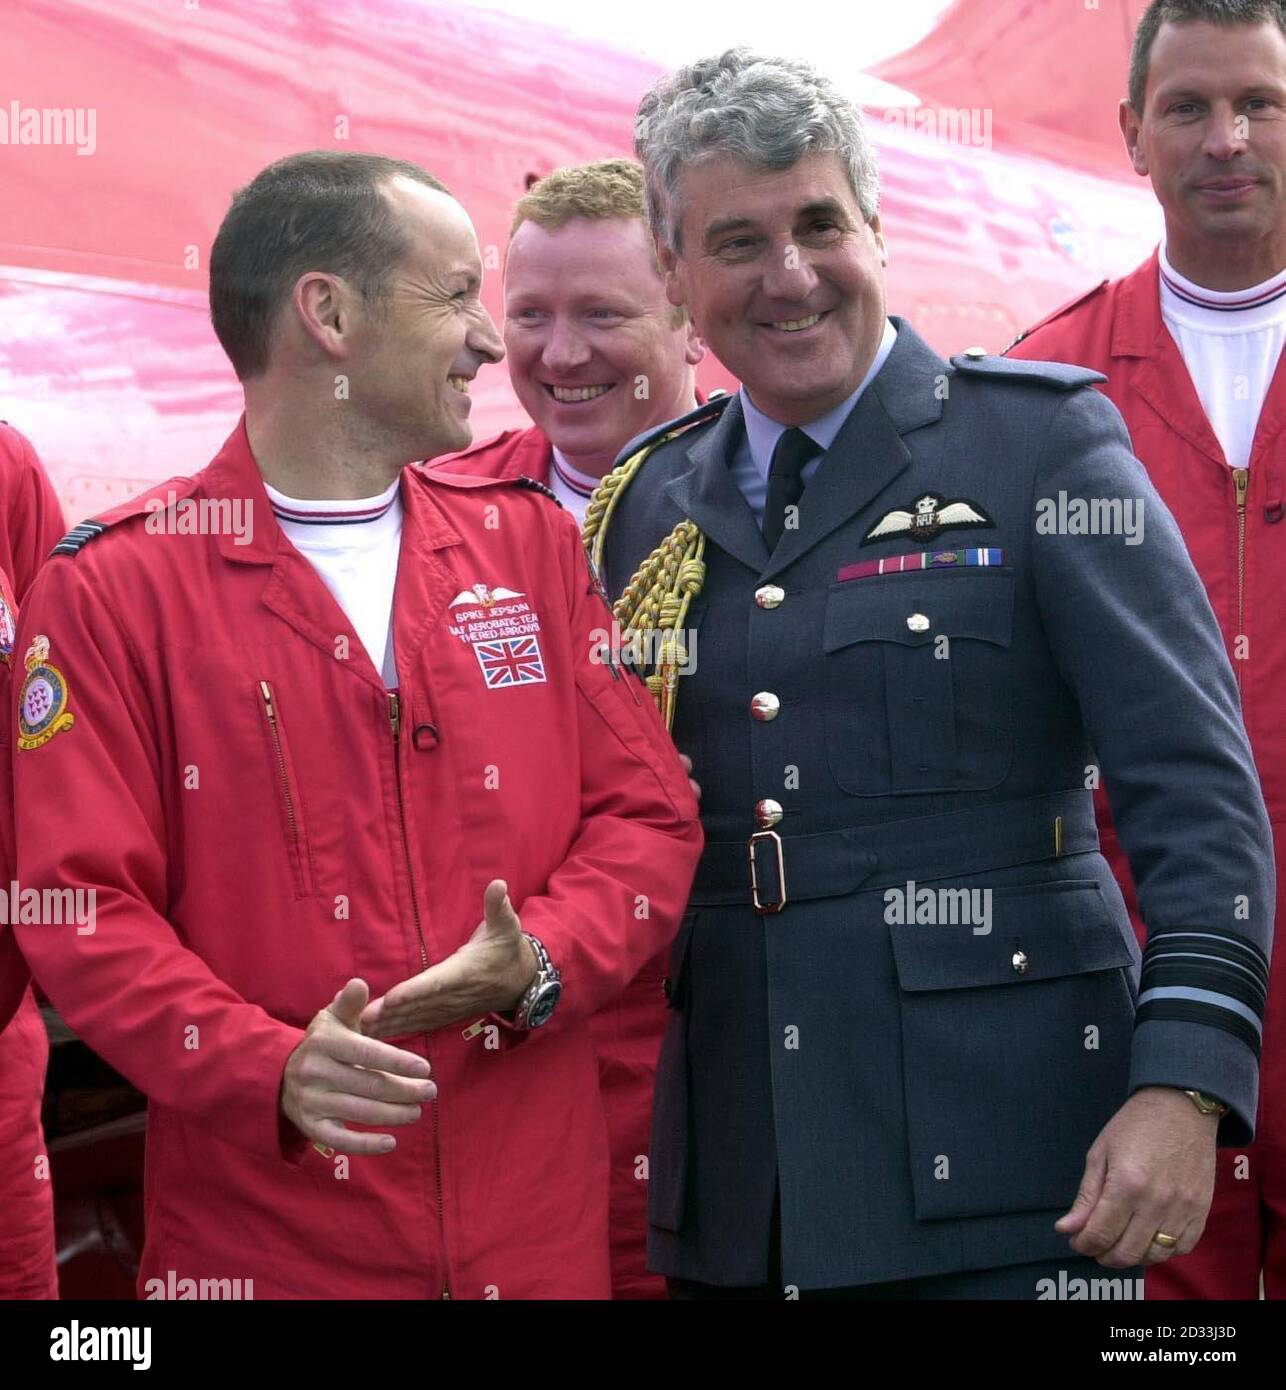 Air Vice Marshal Joe French jokes with Squadron Leader Spike Jepson, known as Red 1, the leader of the Red Arrows Display Team, at RAF Cranwell, in Lincolnshire, as the team prepare for their 40th display season. Since the team's formation in 1965, the Red Arrows have flown over 3,750 displays in 52 countries. Stock Photo